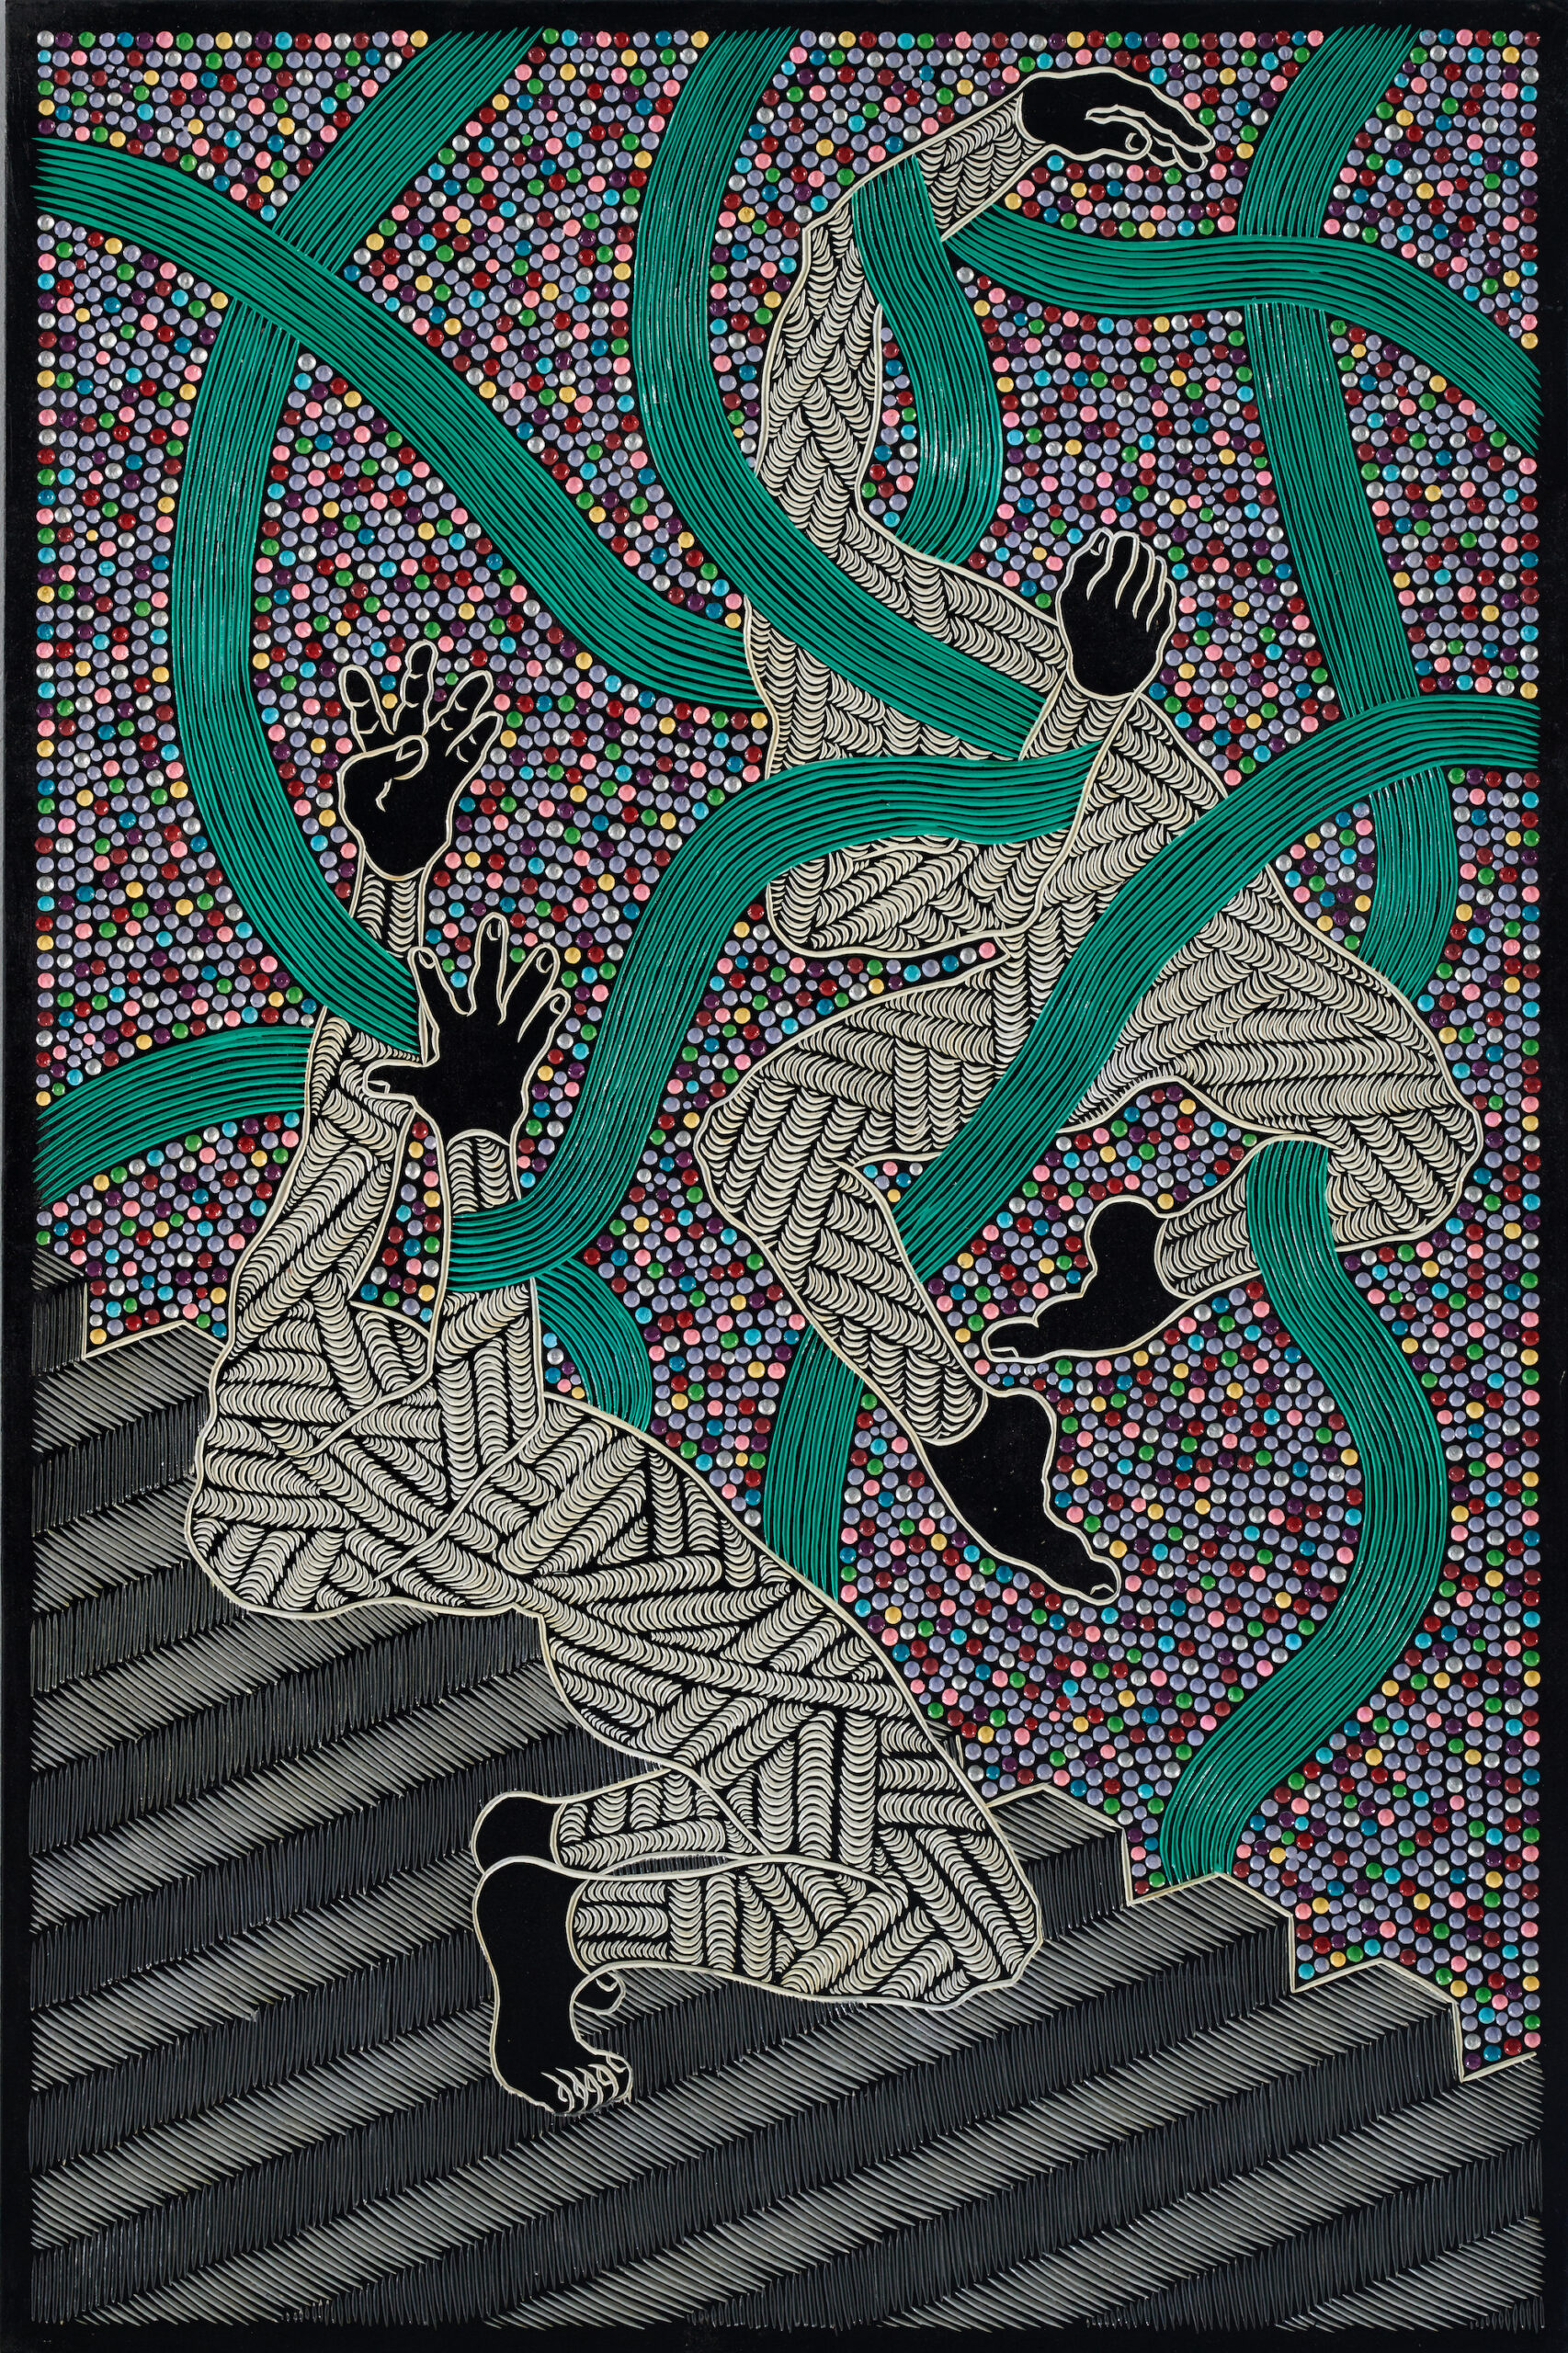 An abstract painting carved from wood with geometric patterns and two headless figures with patterned garments that float through the composition.